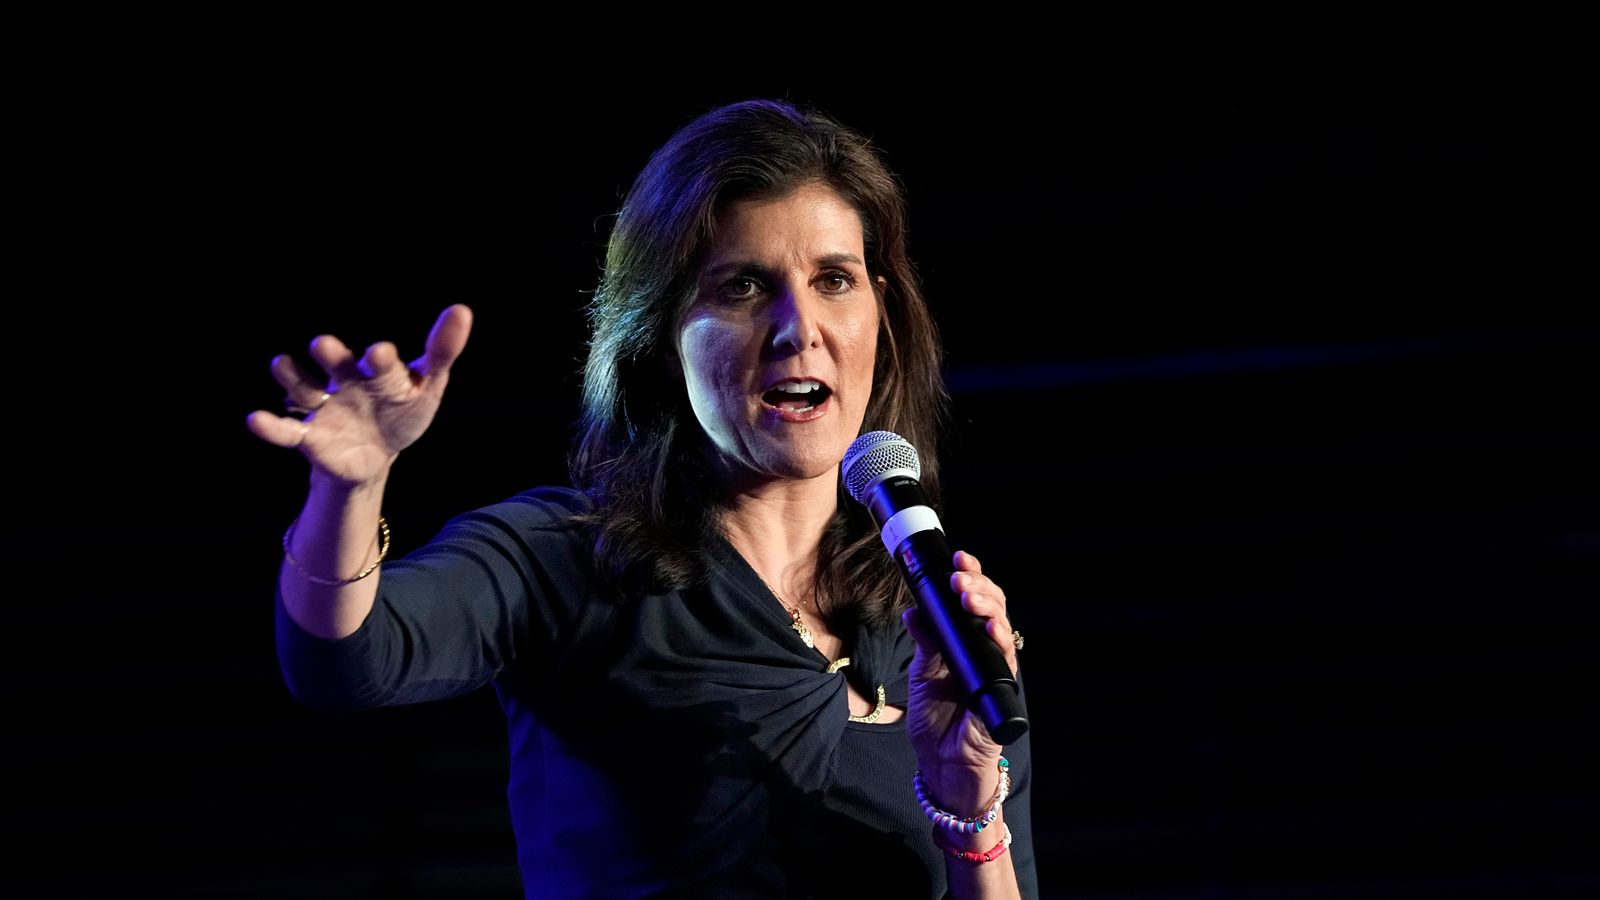 Donald Trump's last Republican rival Nikki Haley to pull out of presidential race